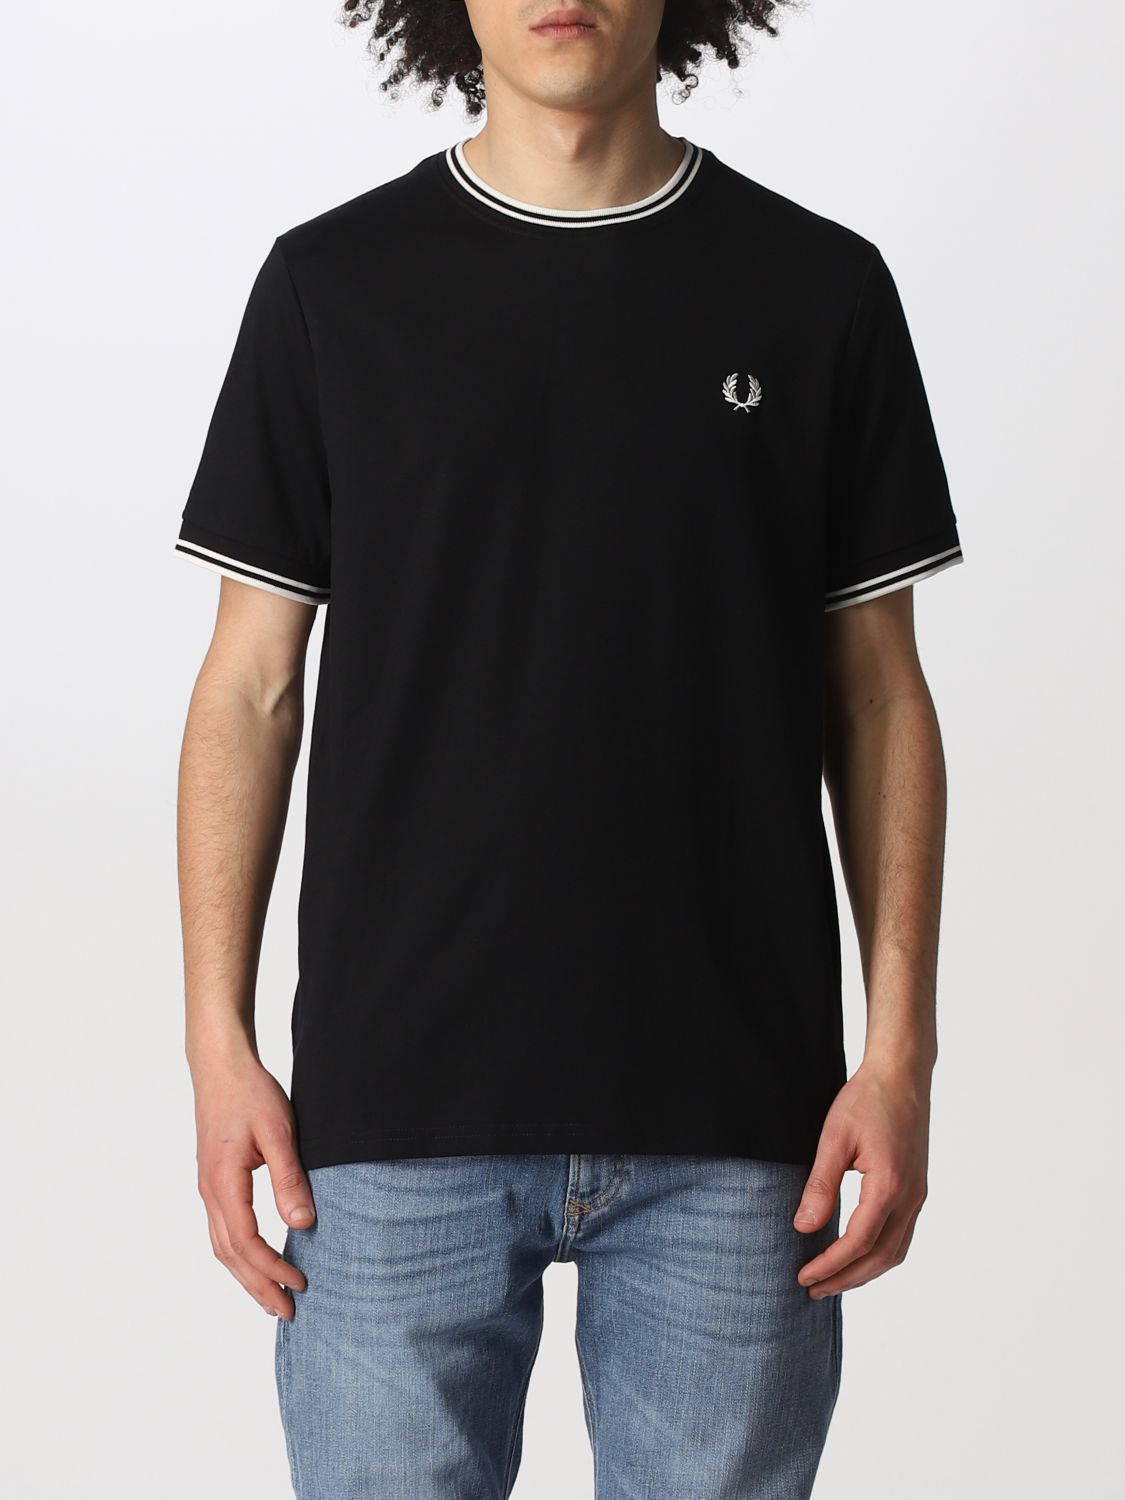 Tシャツ Fred Perry: Tシャツ メンズ Fred Perry ブラック 1